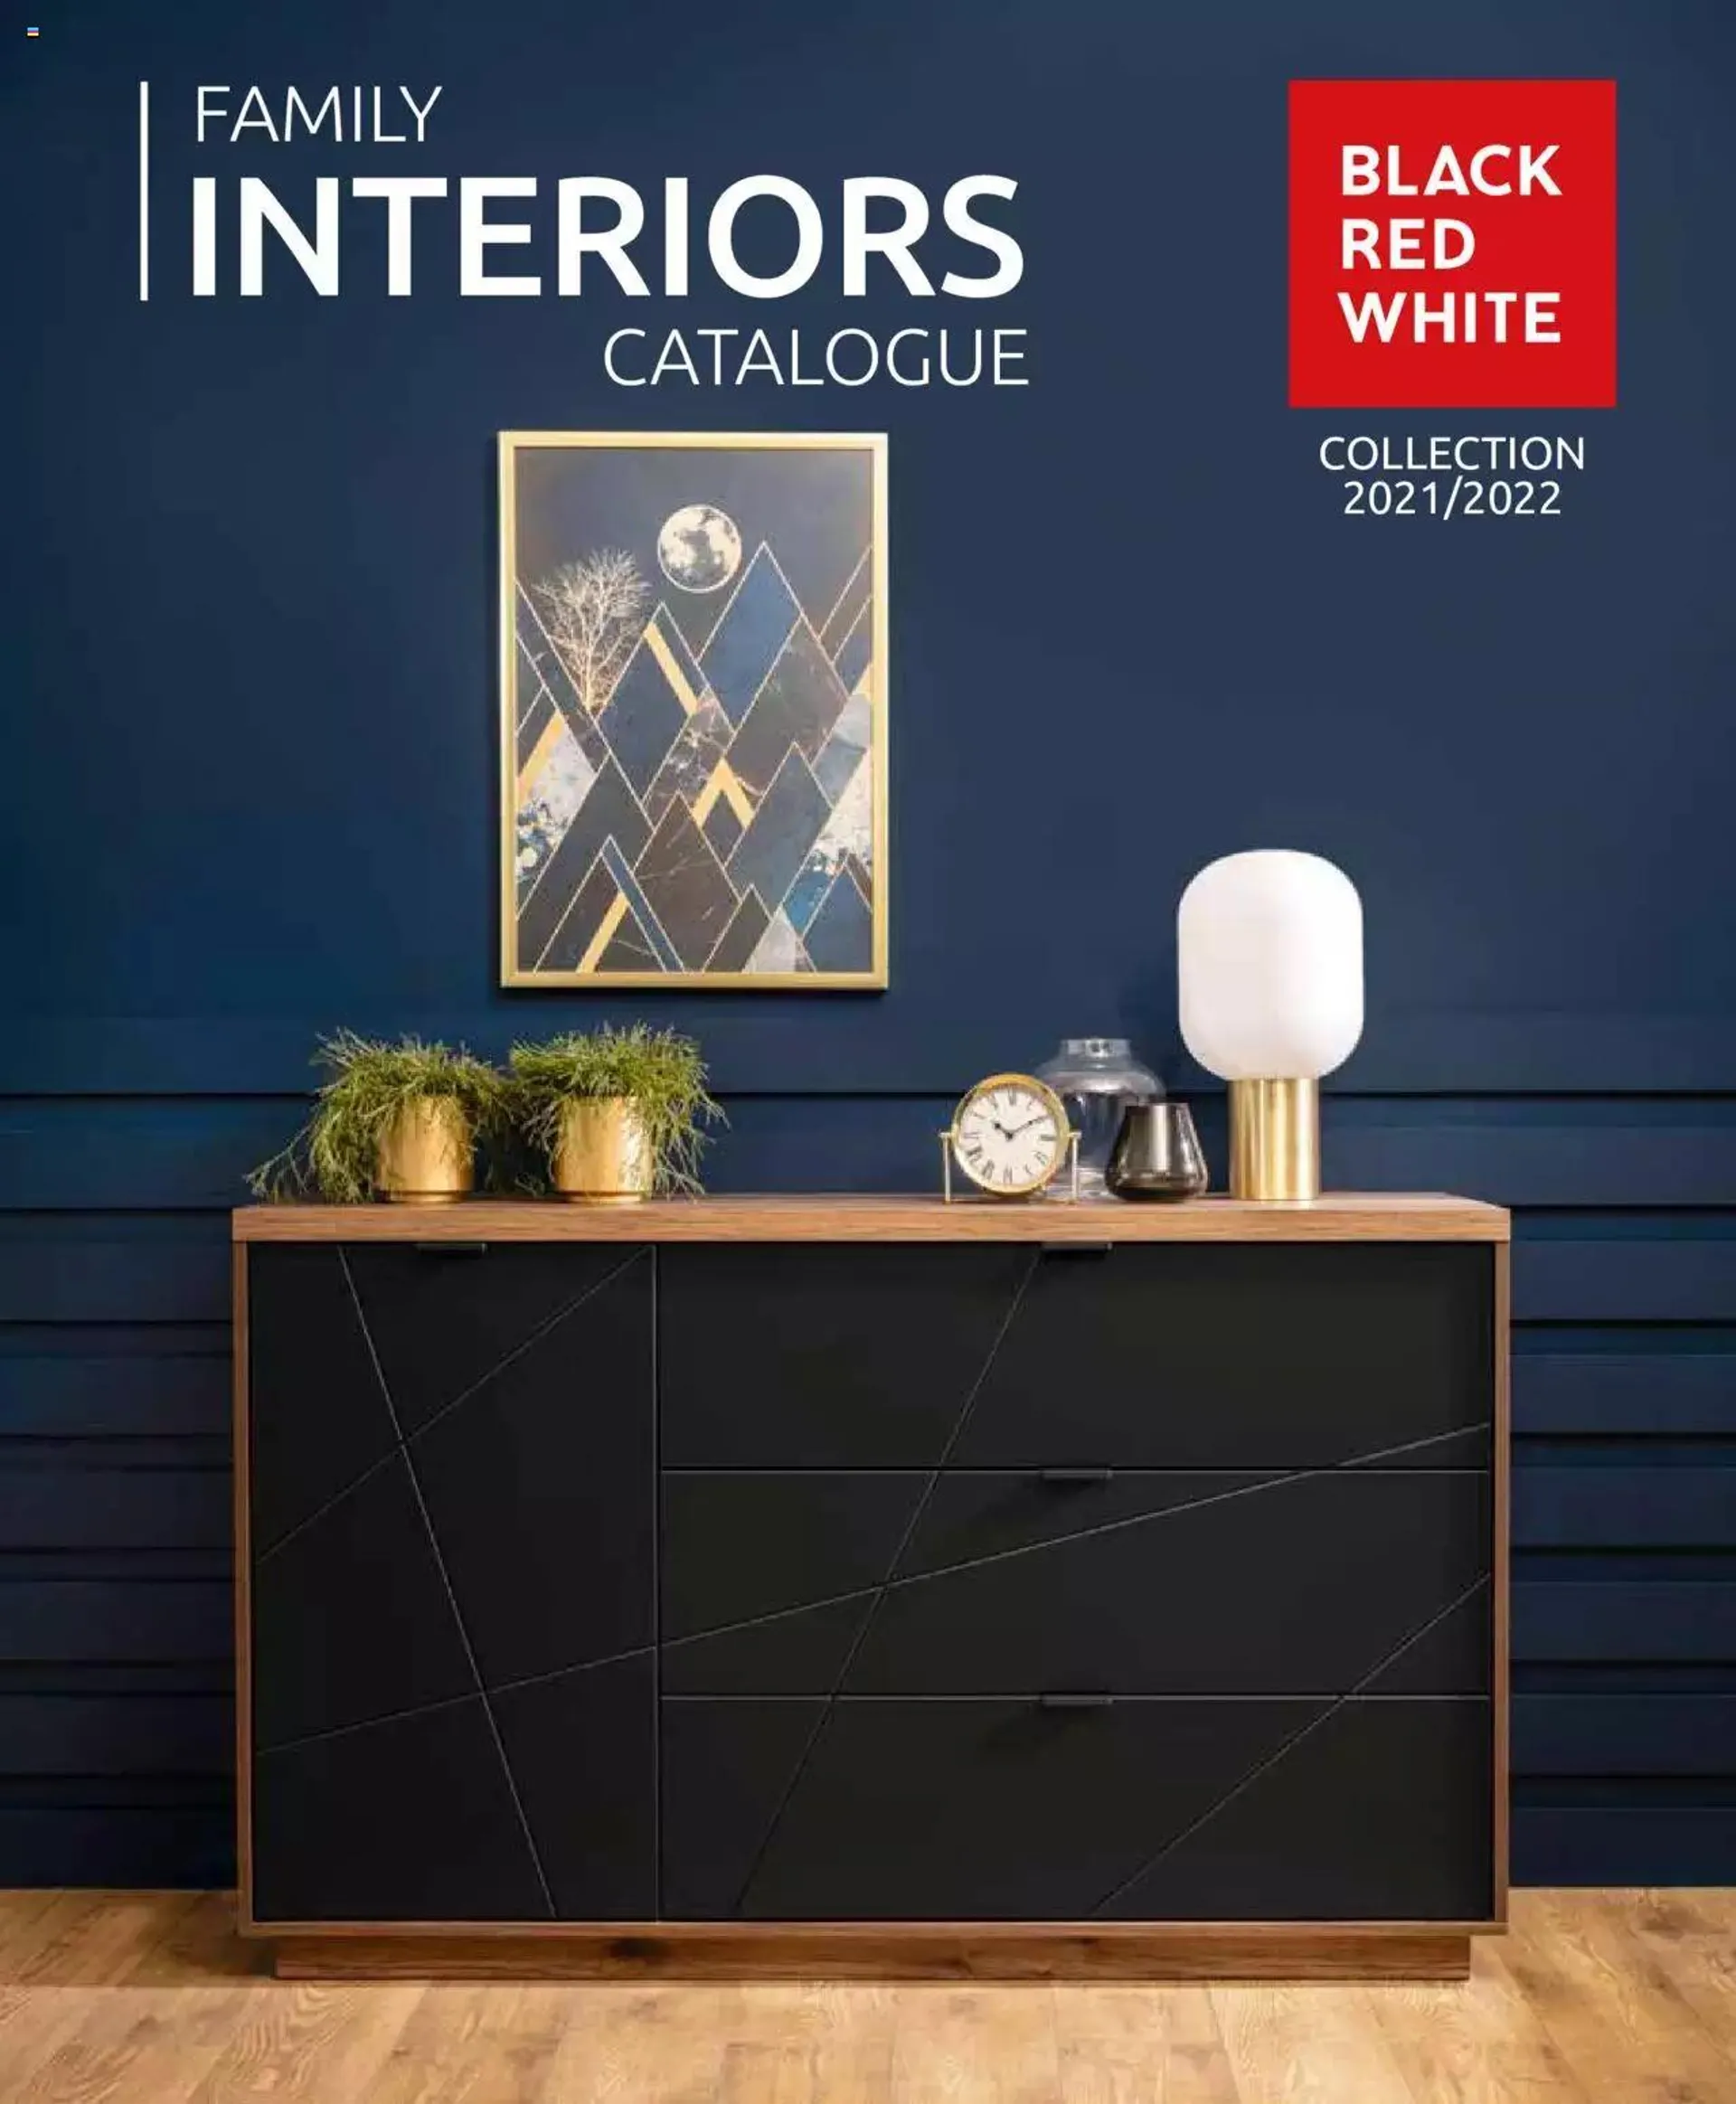 Black Red White - Family Interiors Catalogue 2021/2022 - 0